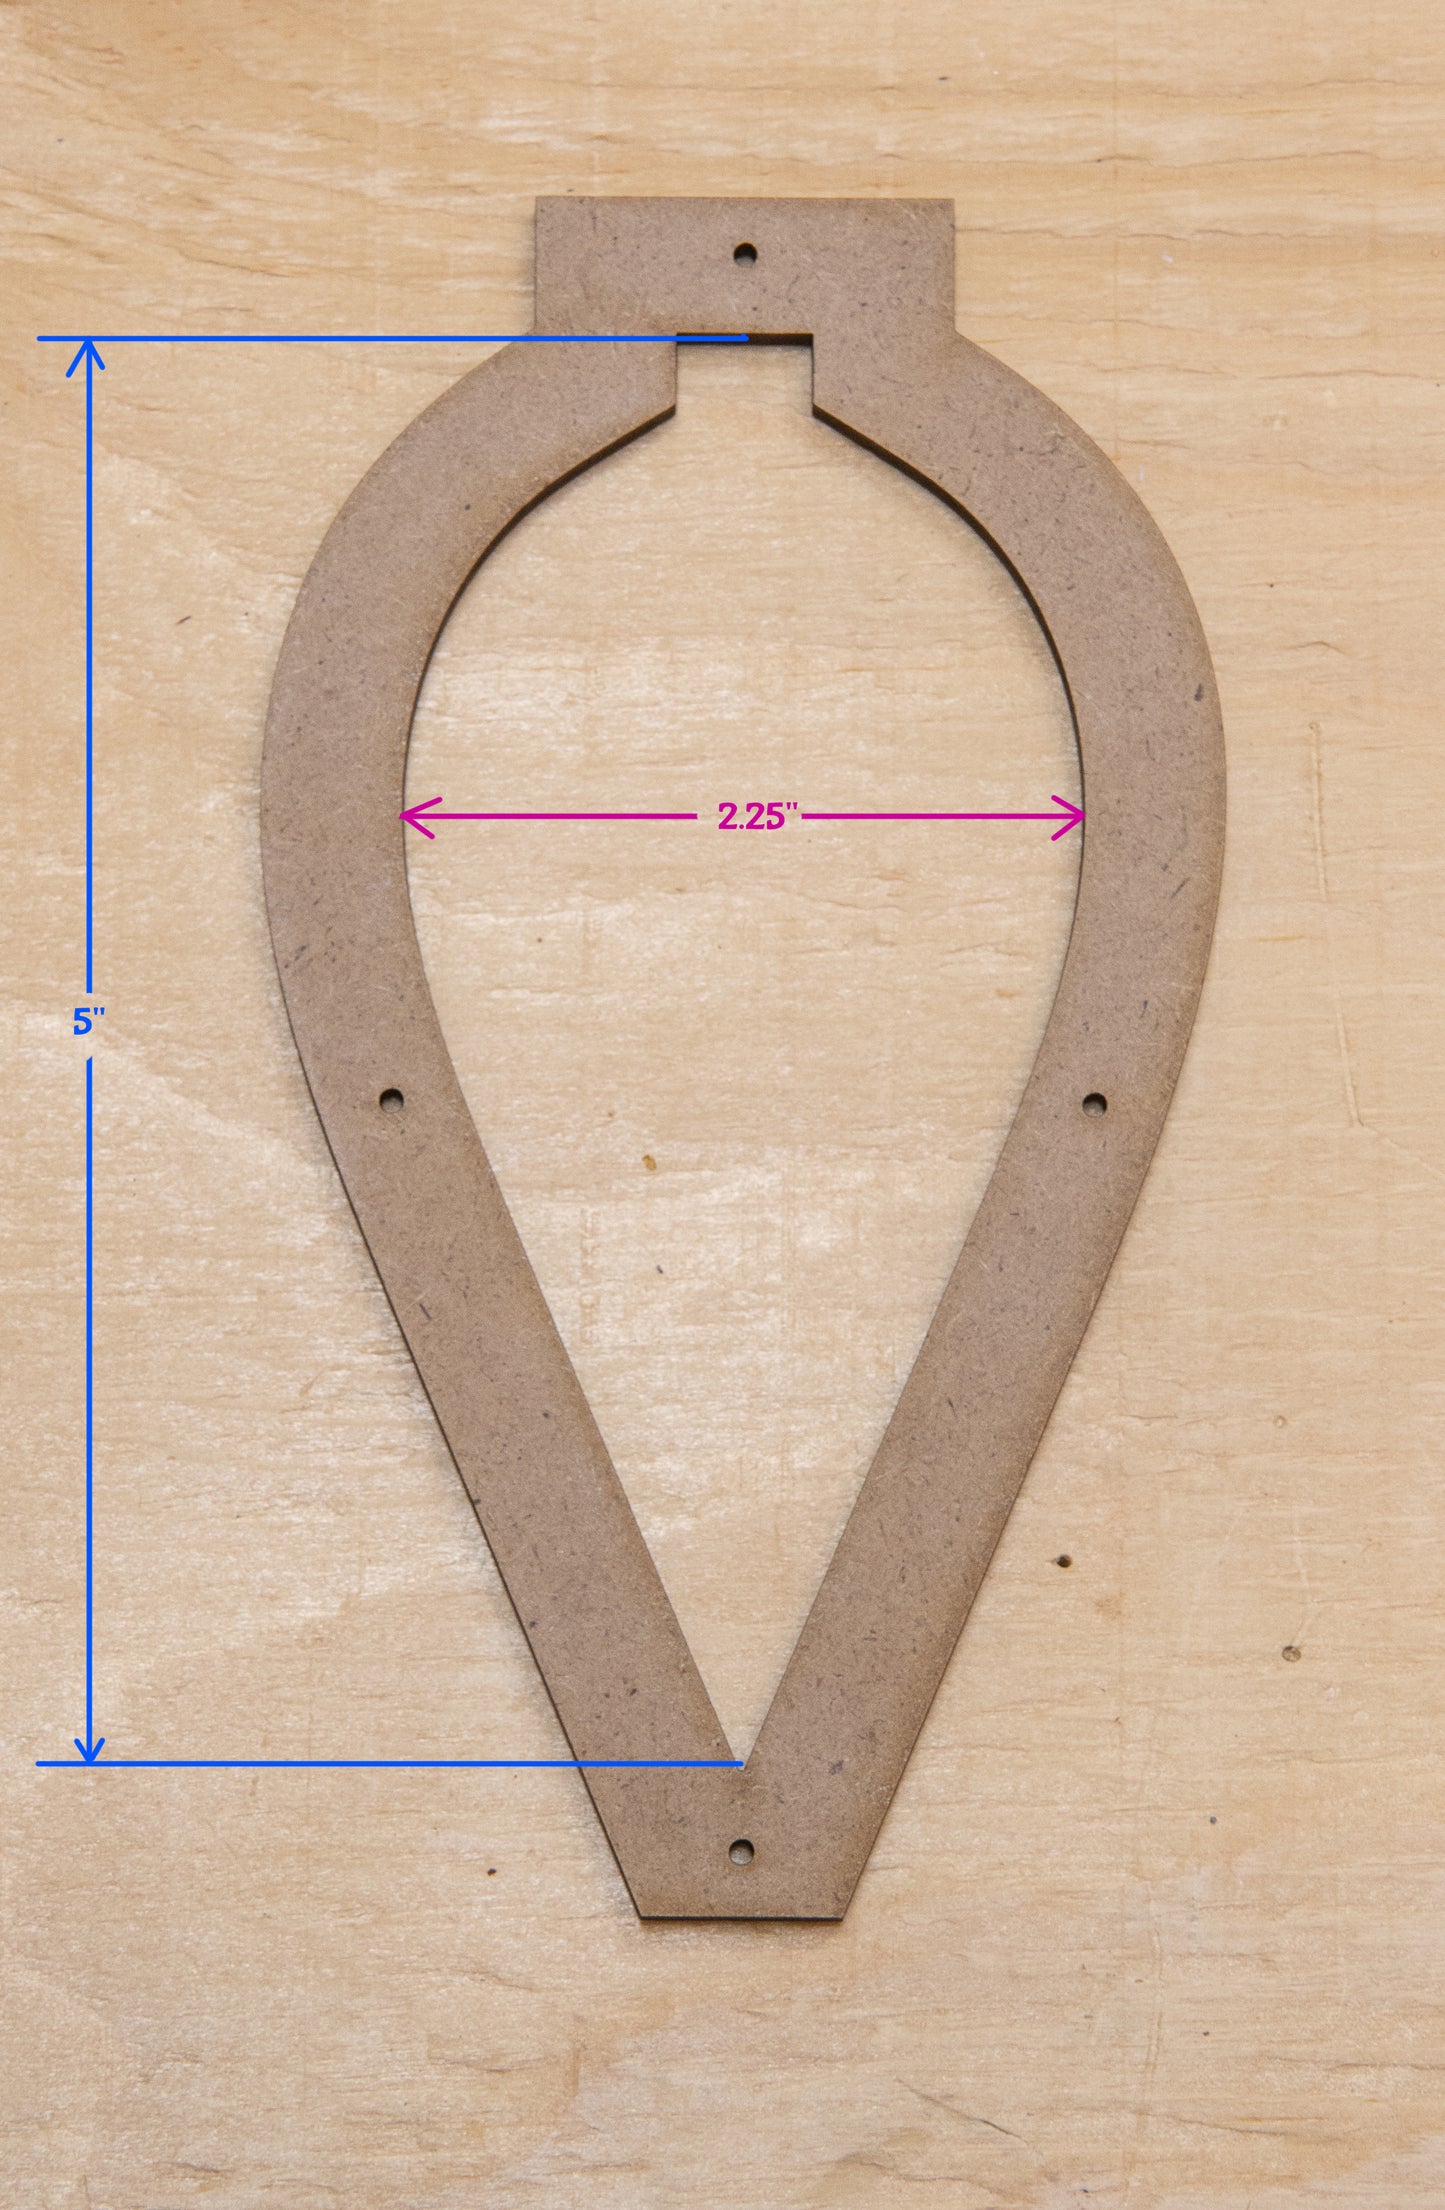 Glassola Tools Teardrop Ornament Layout Frame, with Measurements